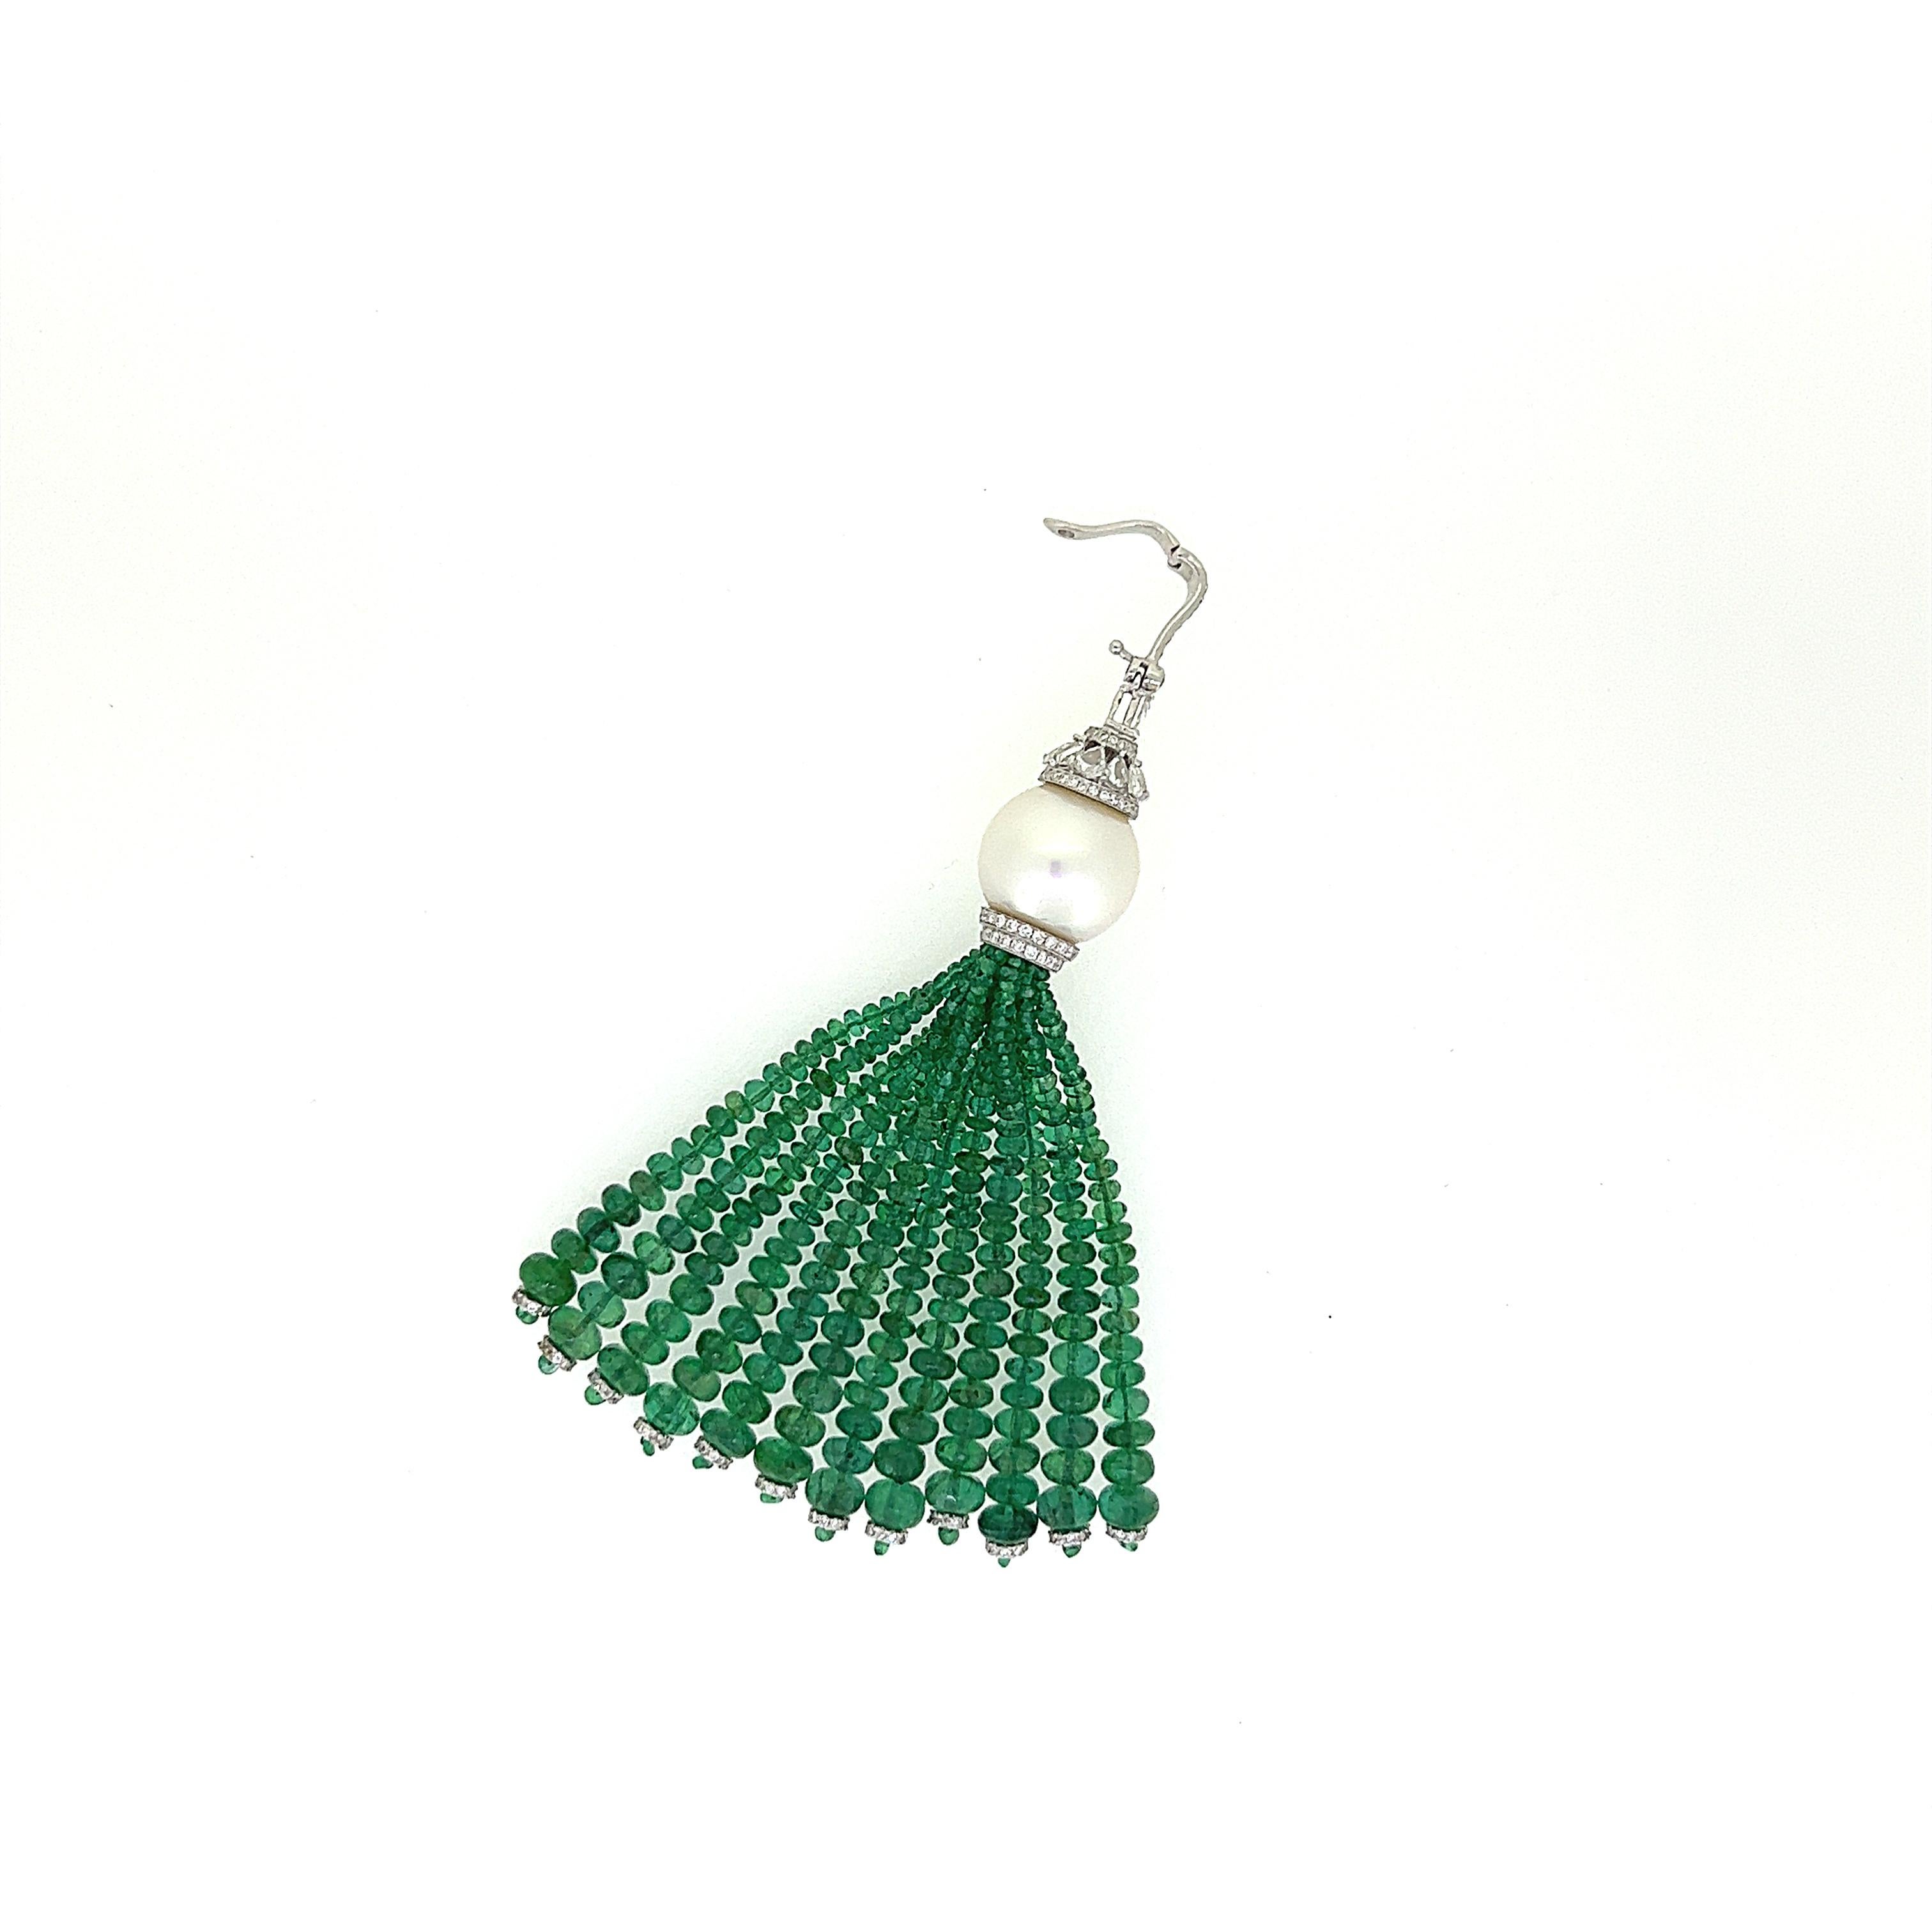 79.84 Carat Emerald Pearl & Diamond Tassel Necklace Set on 18 Karat White Gold In New Condition For Sale In Wan Chai District, HK